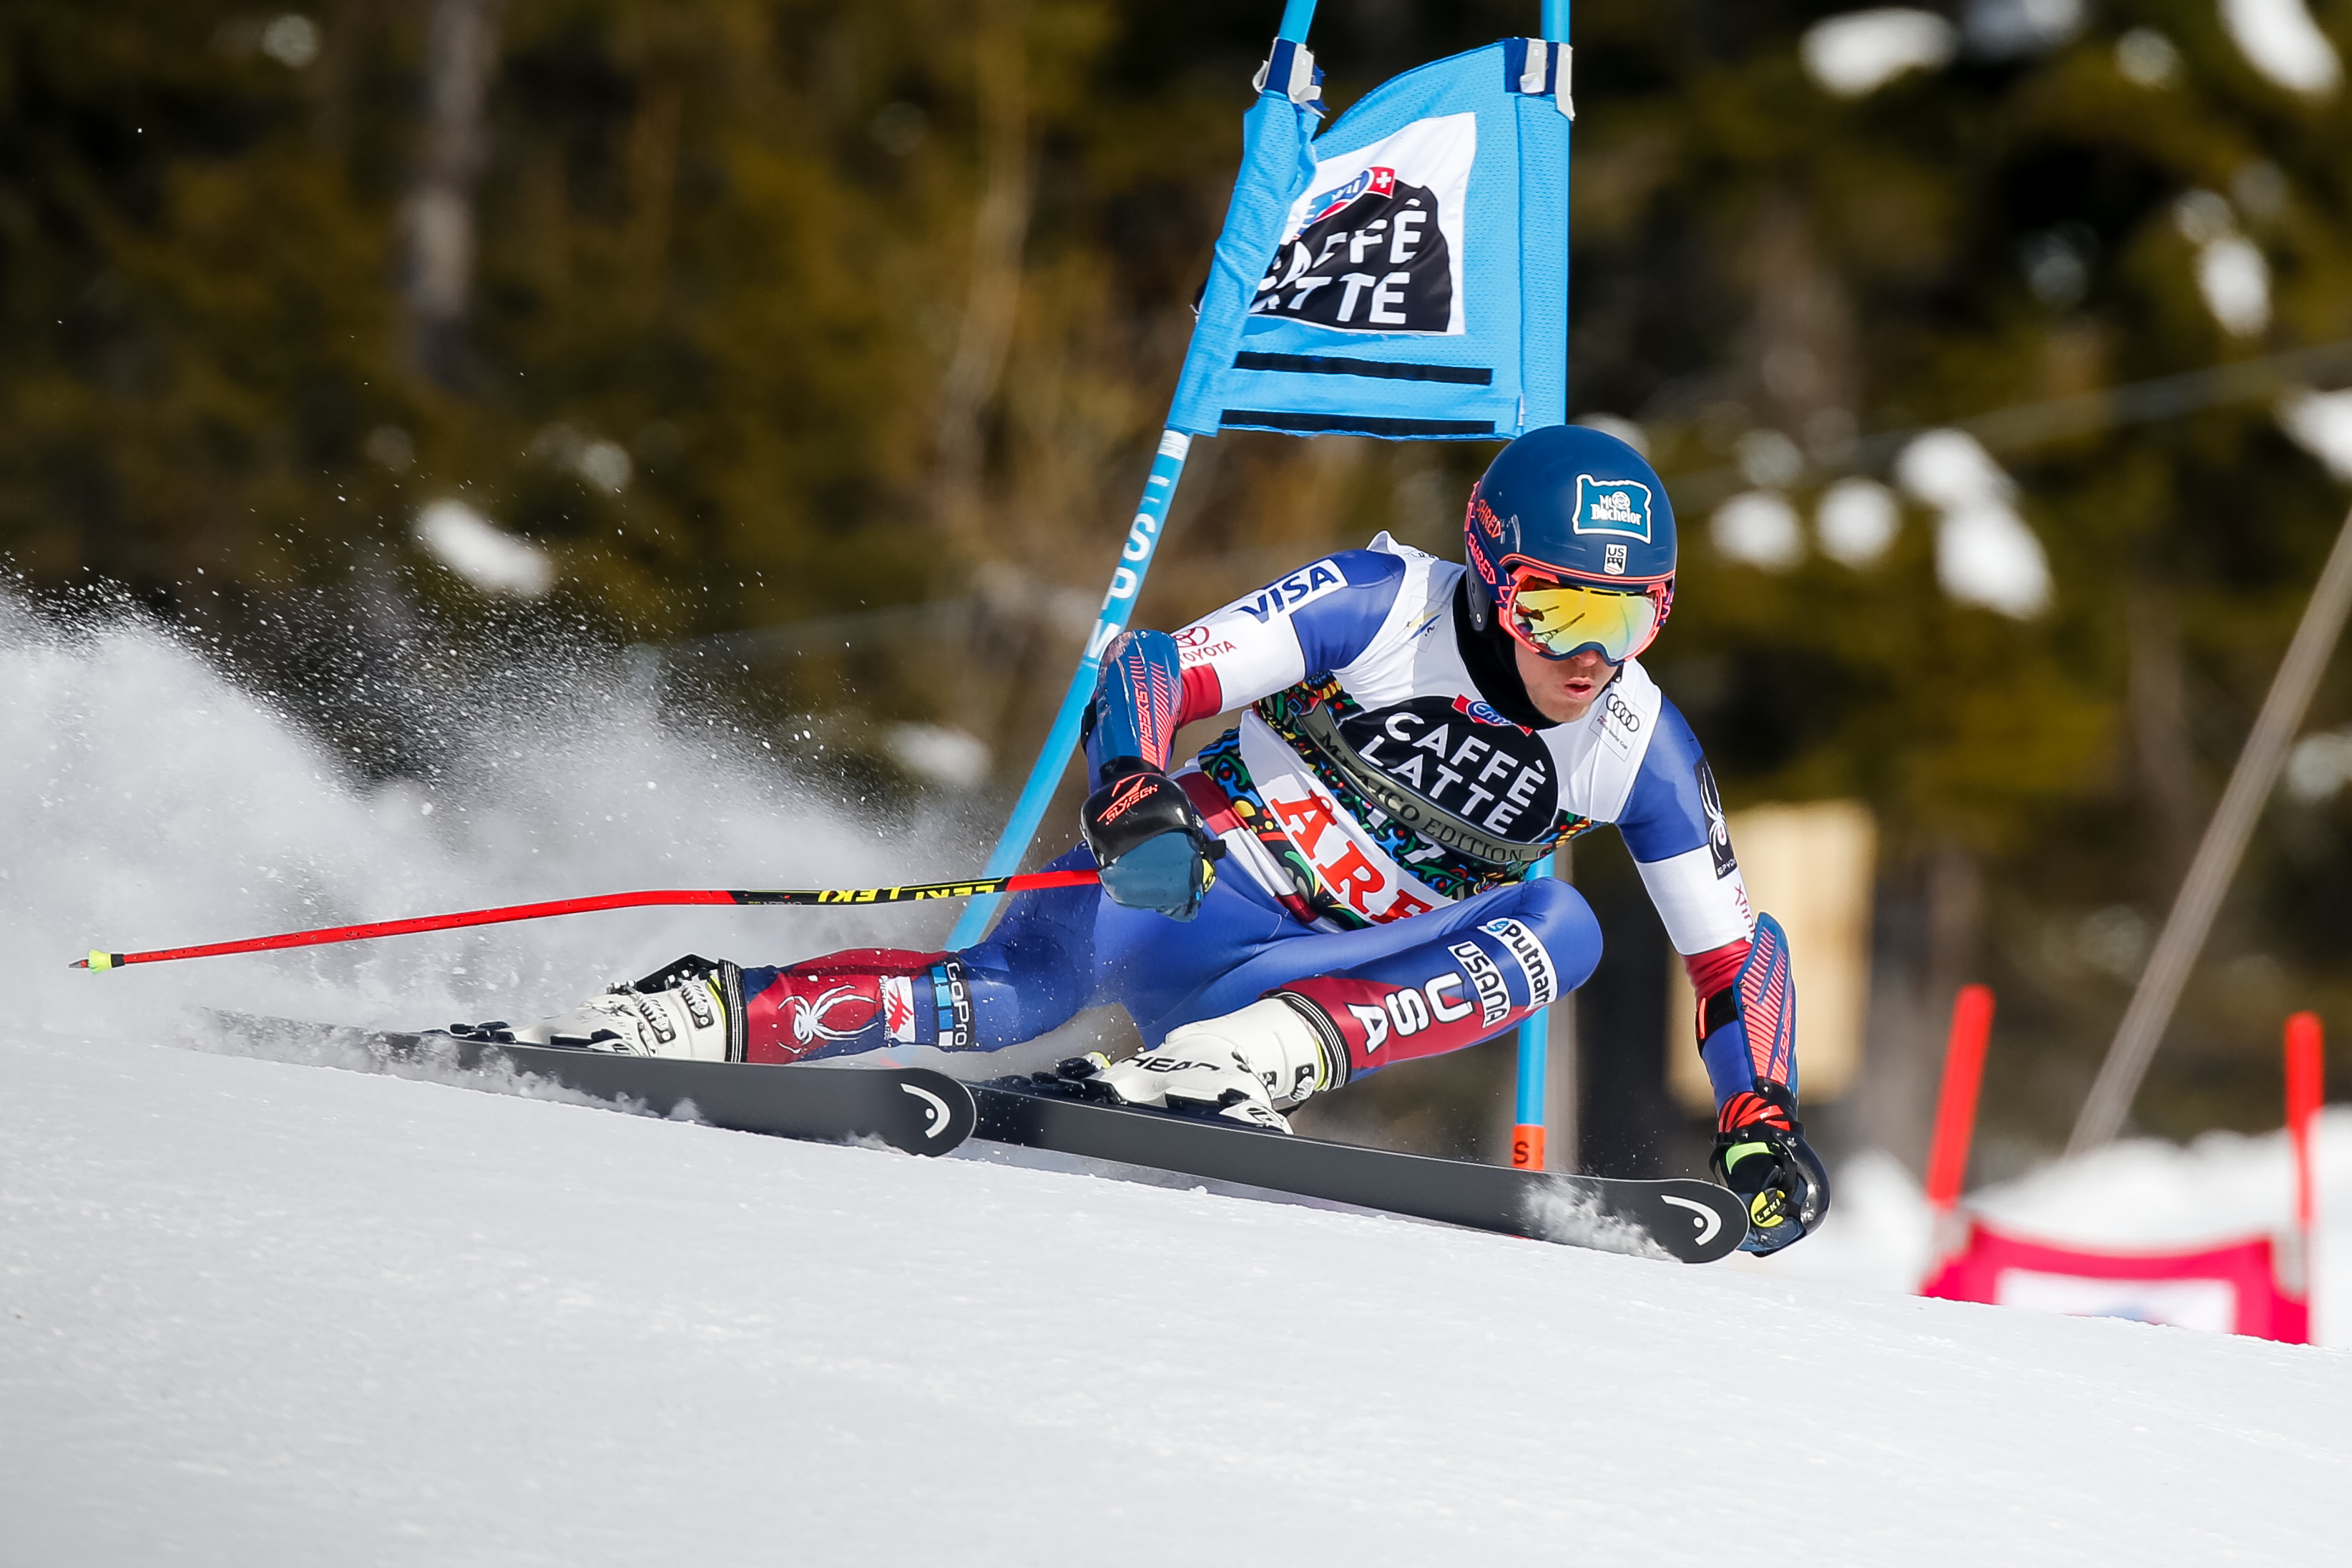 Tommy Ford finished eight in the giant slalom at the FIS Ski World Cup Finals Saturday in Are, Sweden. (Getty Images/Agence Zoon - Alexis Boichard)